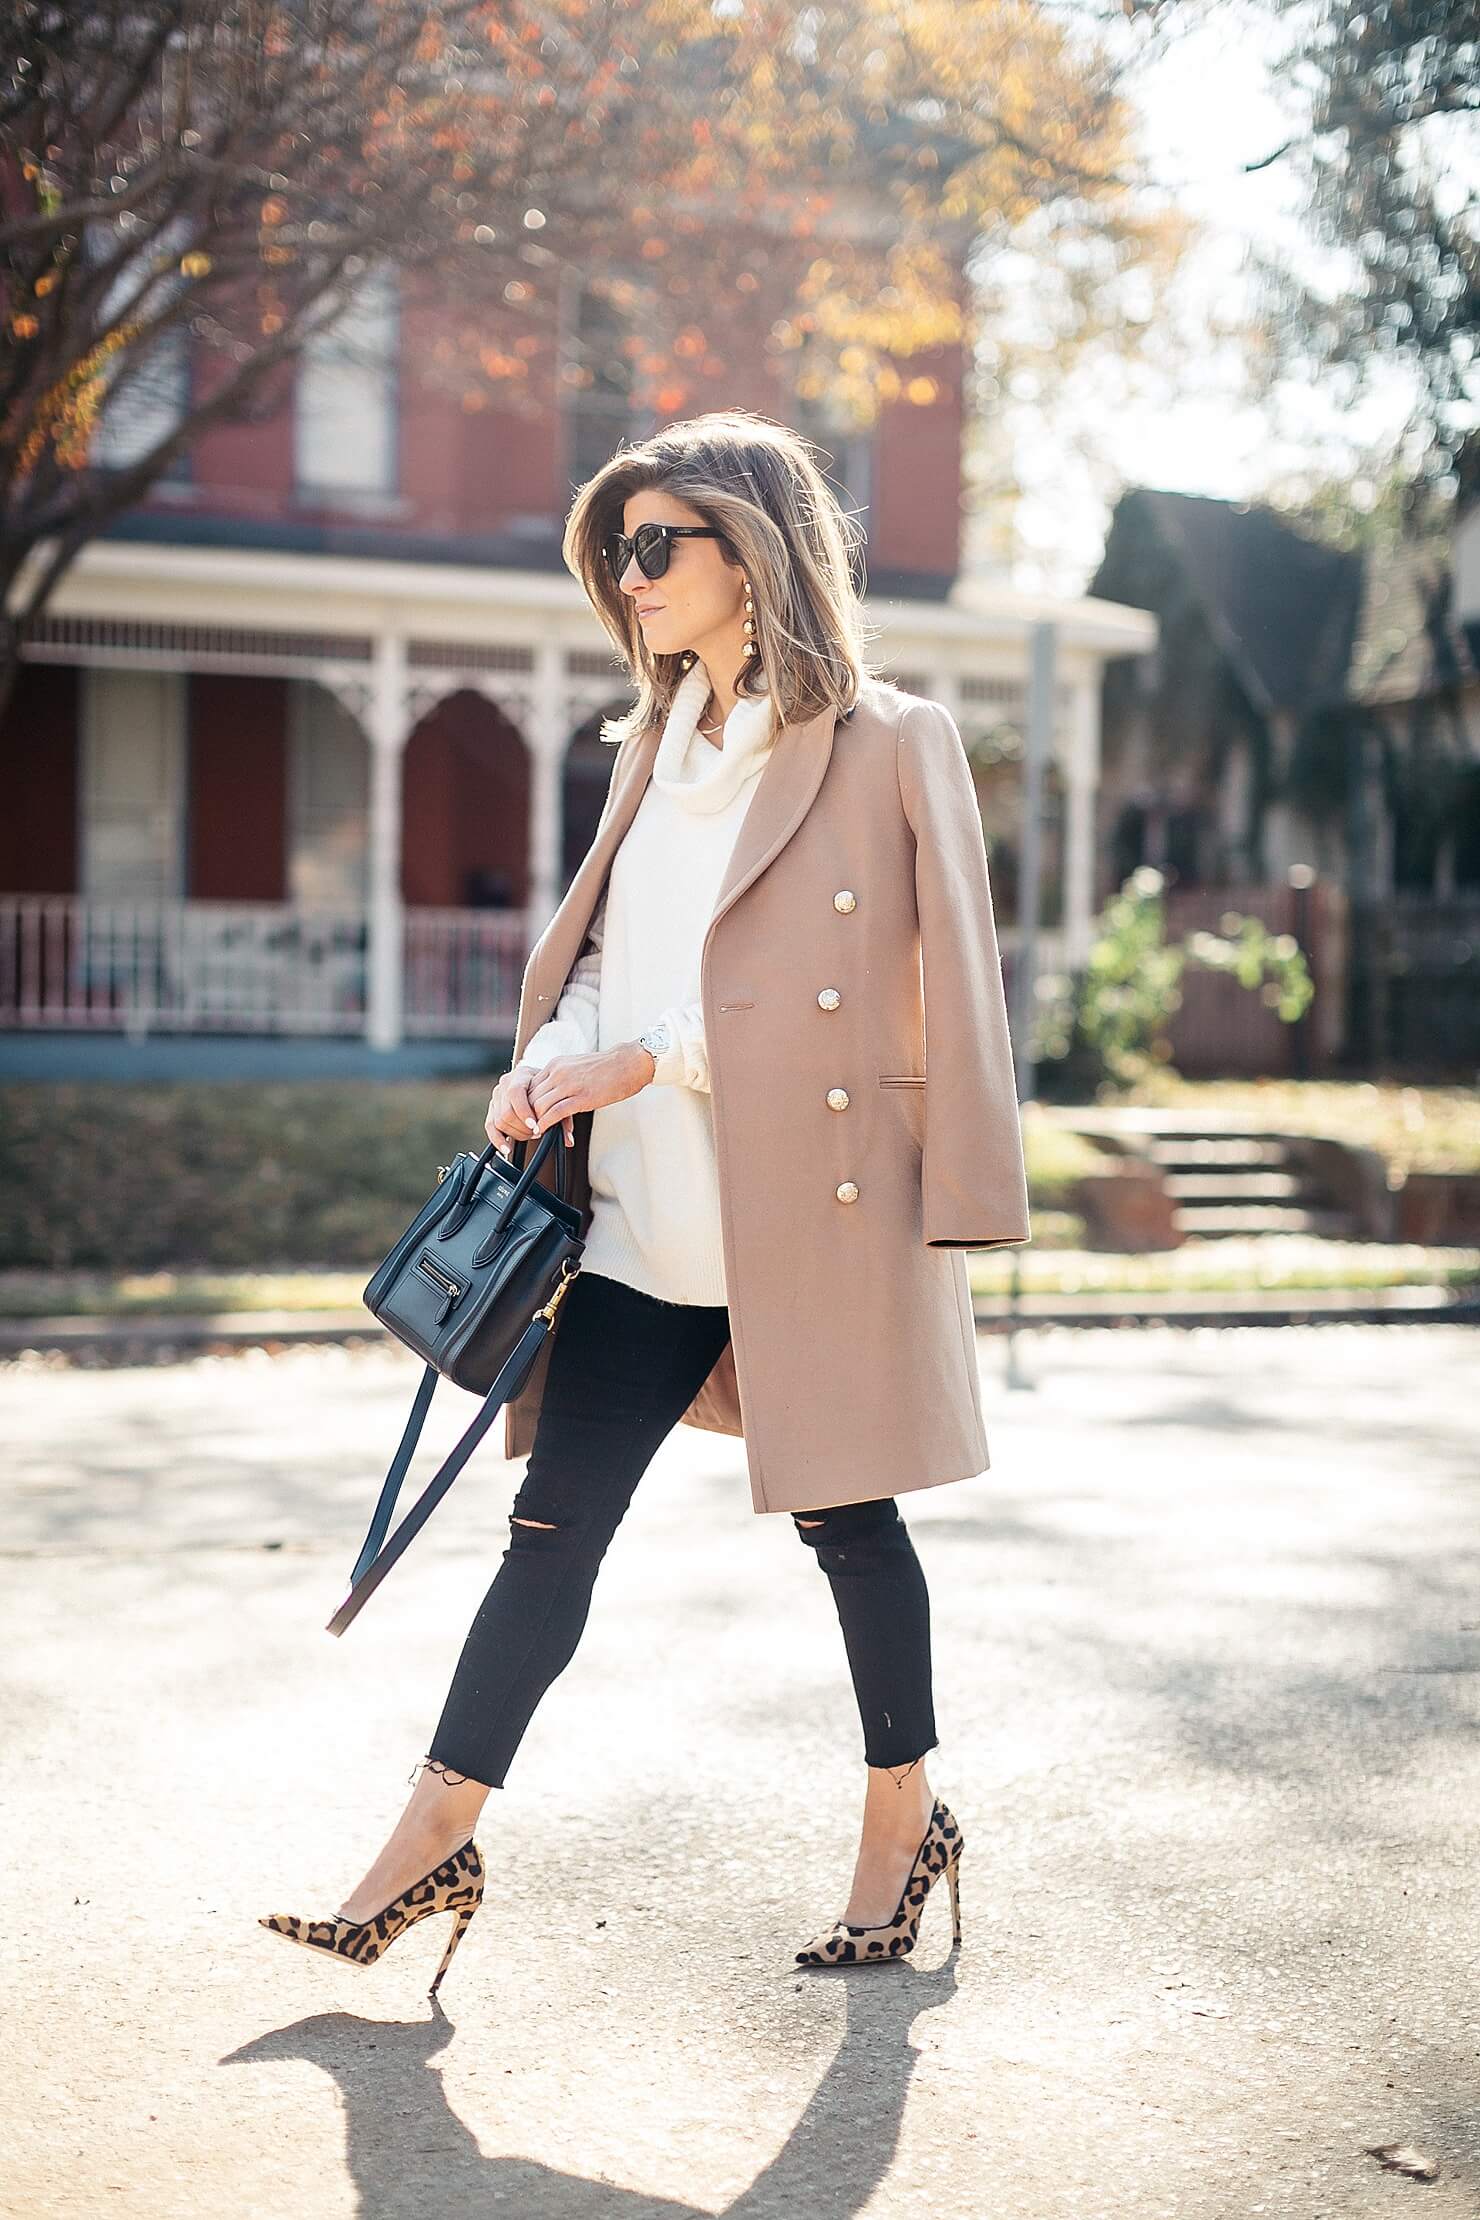 winter coat options, how to style your winter coat, winter outfit ideas